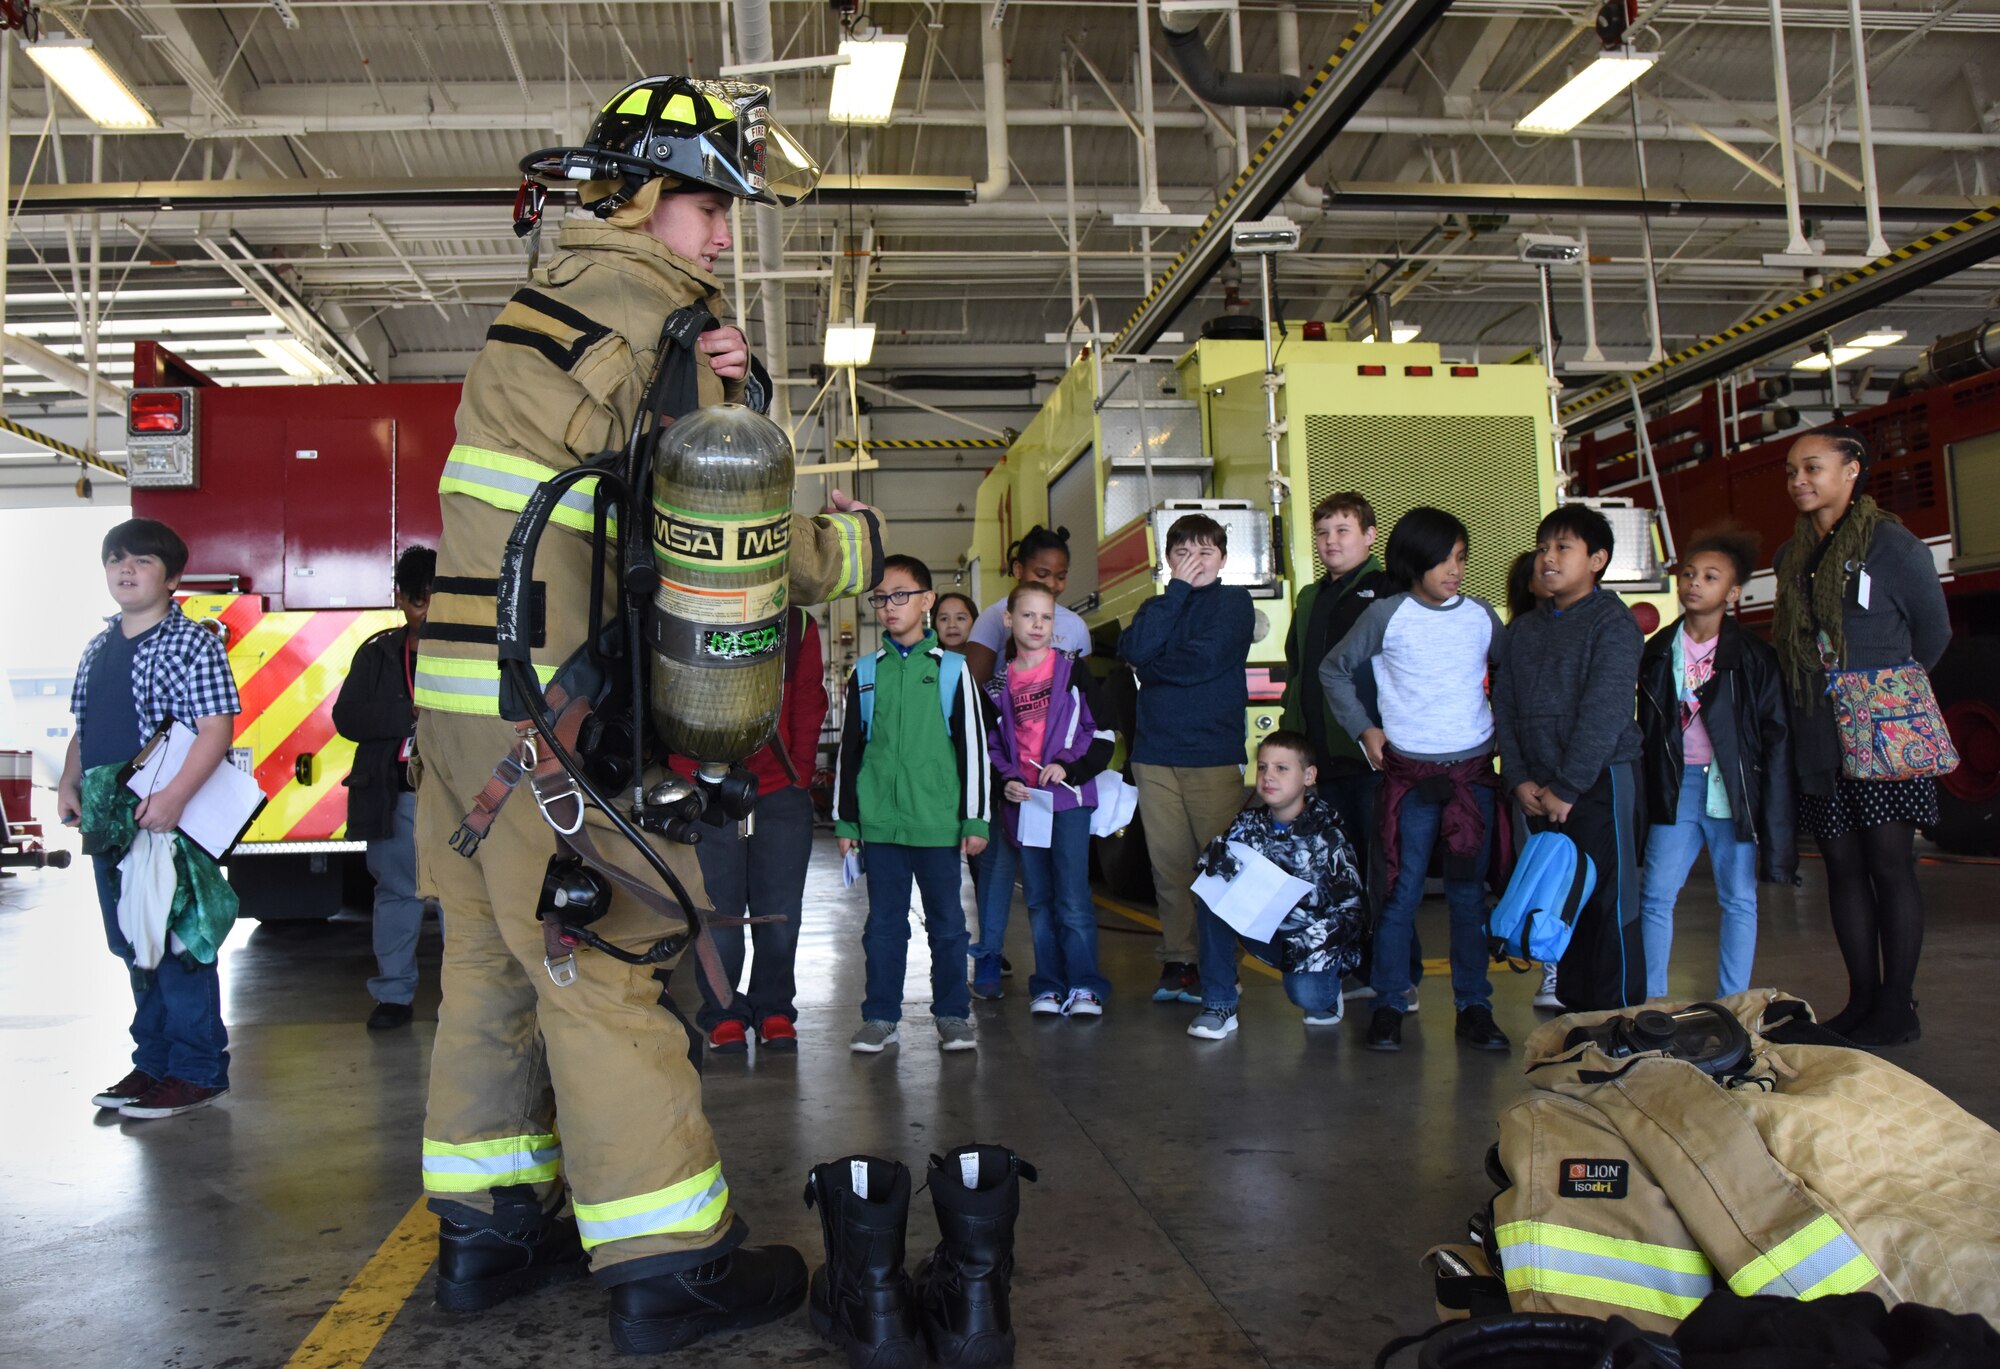 Seth Corn, 81st Infrastructure Division driver operator, demonstrates to school-aged children how to quickly get dressed in firefighter gear during Biloxi School District Career Exploration Day on Keesler Air Force Base, Mississippi, March 7, 2019. The children also toured the 334th Training Squadron air traffic control school, 335th TRS weather facility and received a demonstration from the 81st Security Forces Squadron military working dogs. (U.S. Air Force photo by Kemberly Groue)